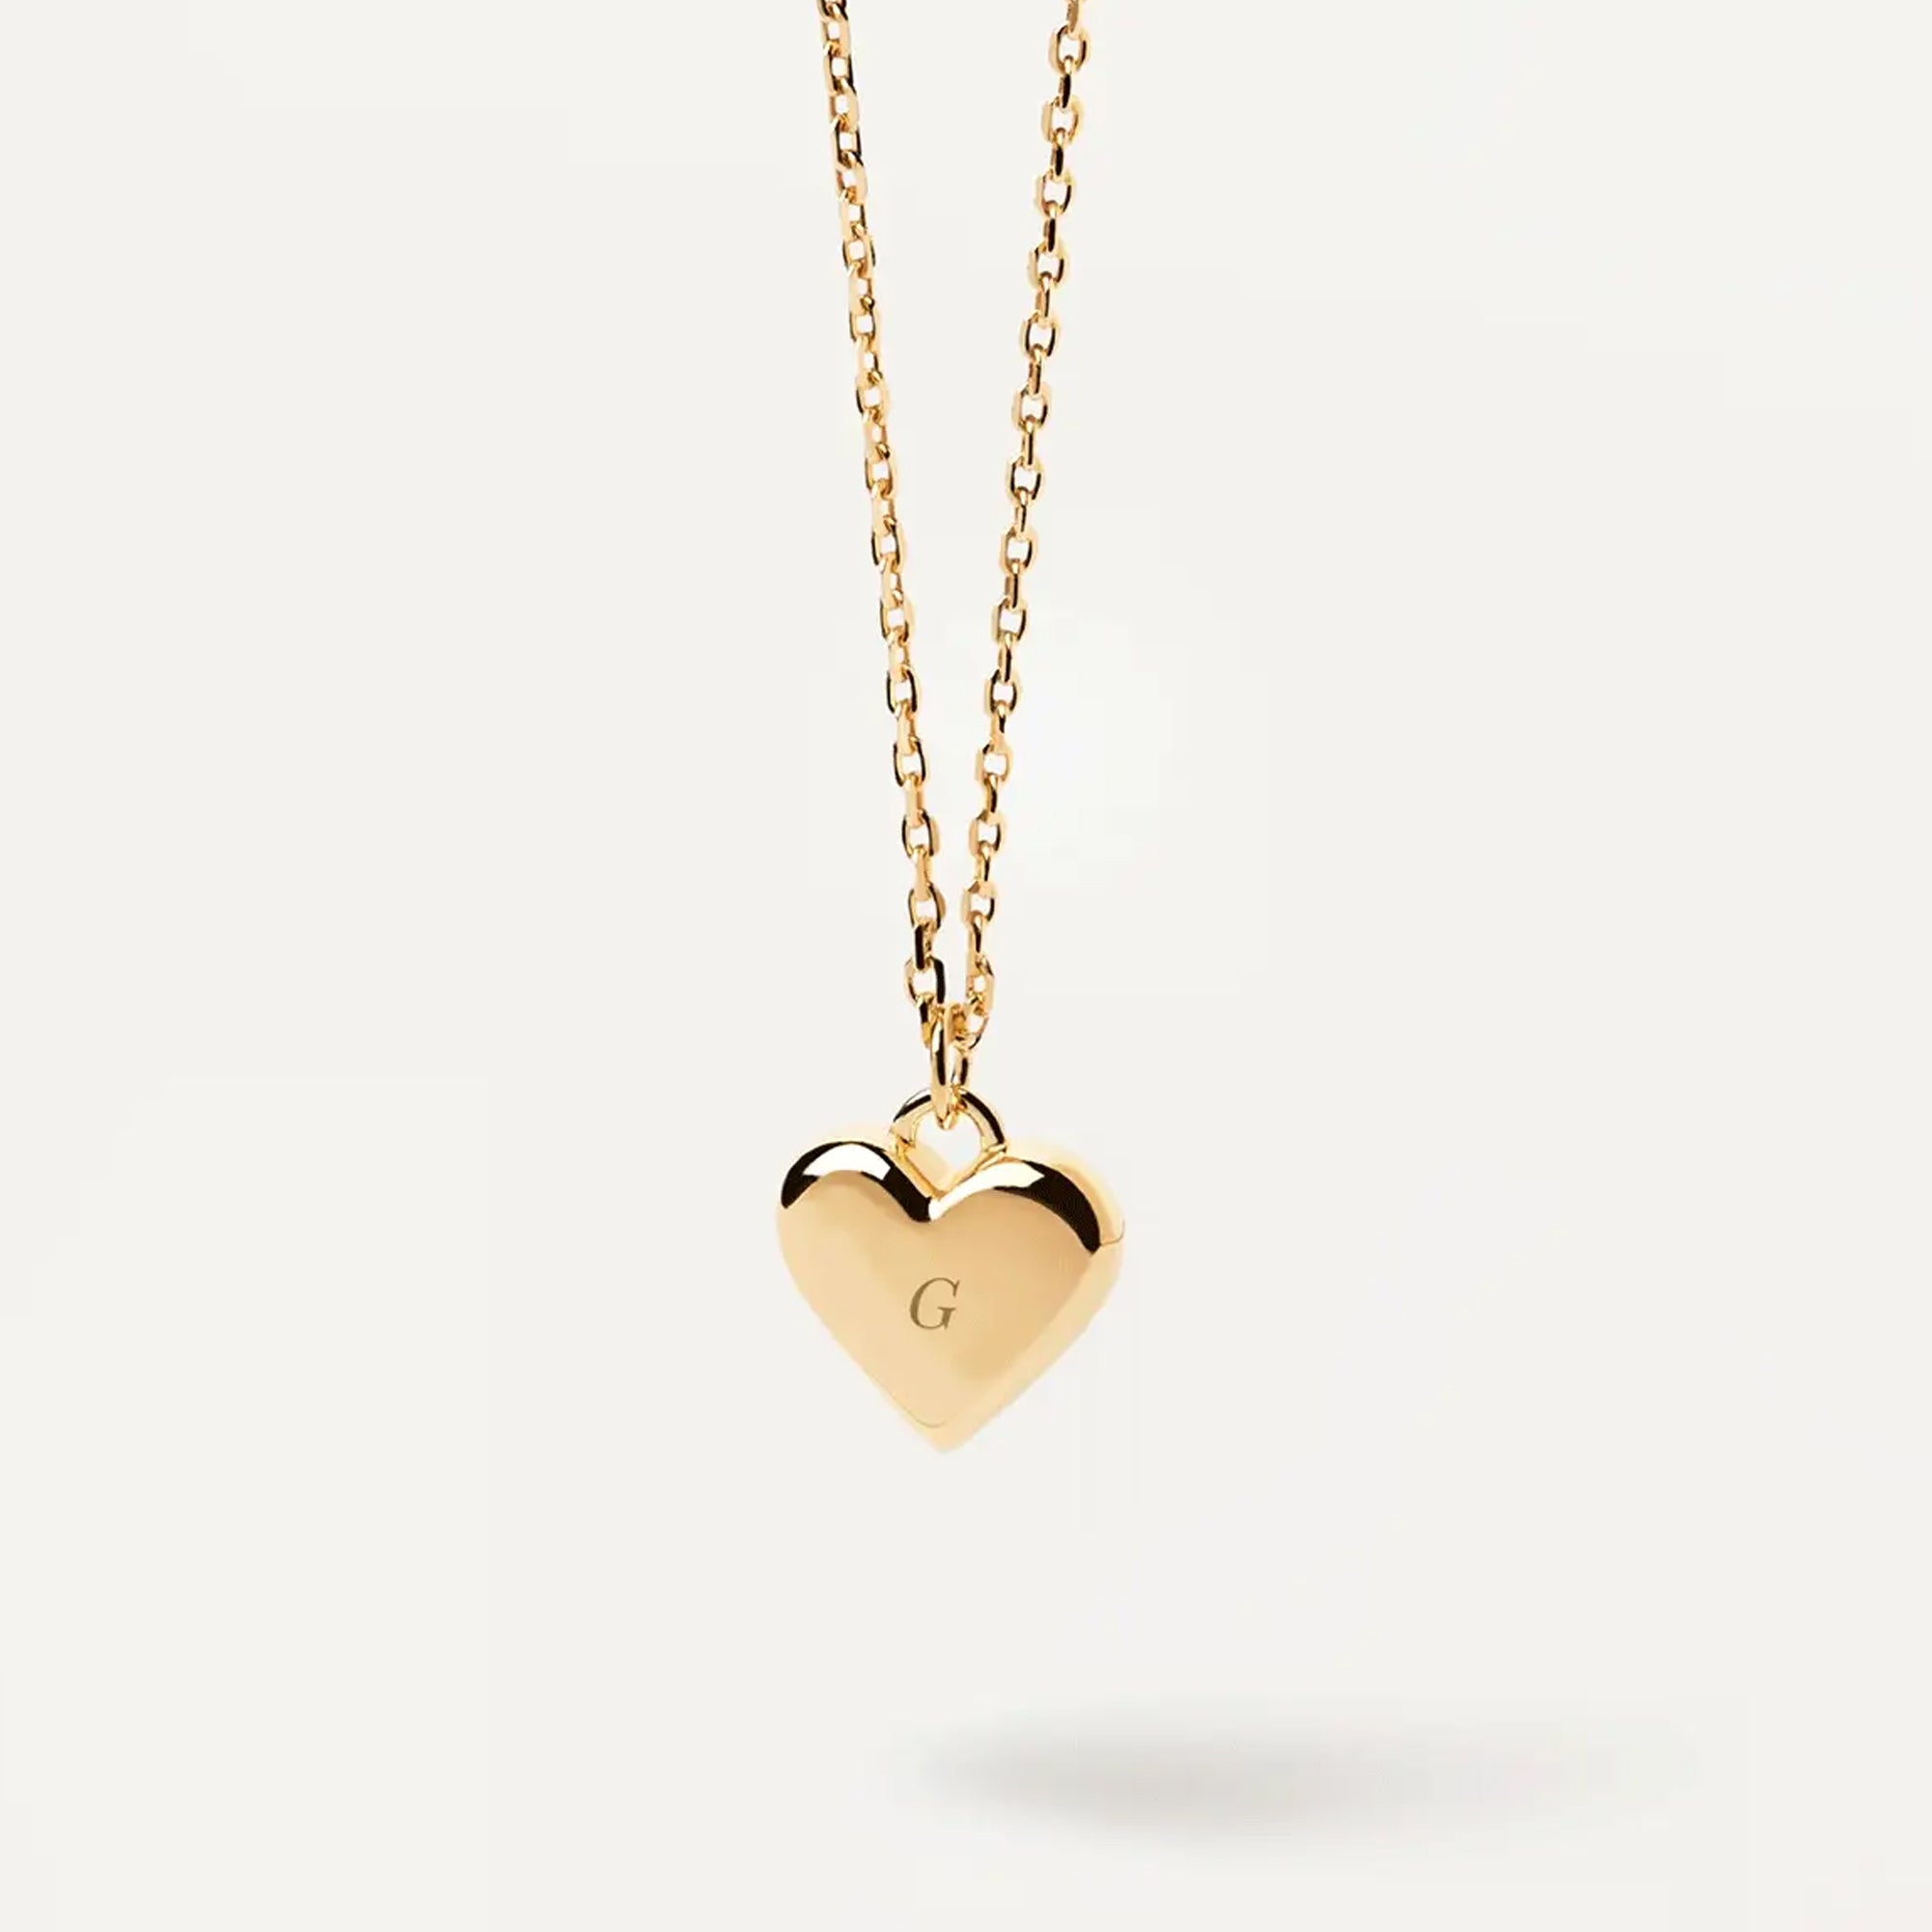 L'Absolu Gold Necklace